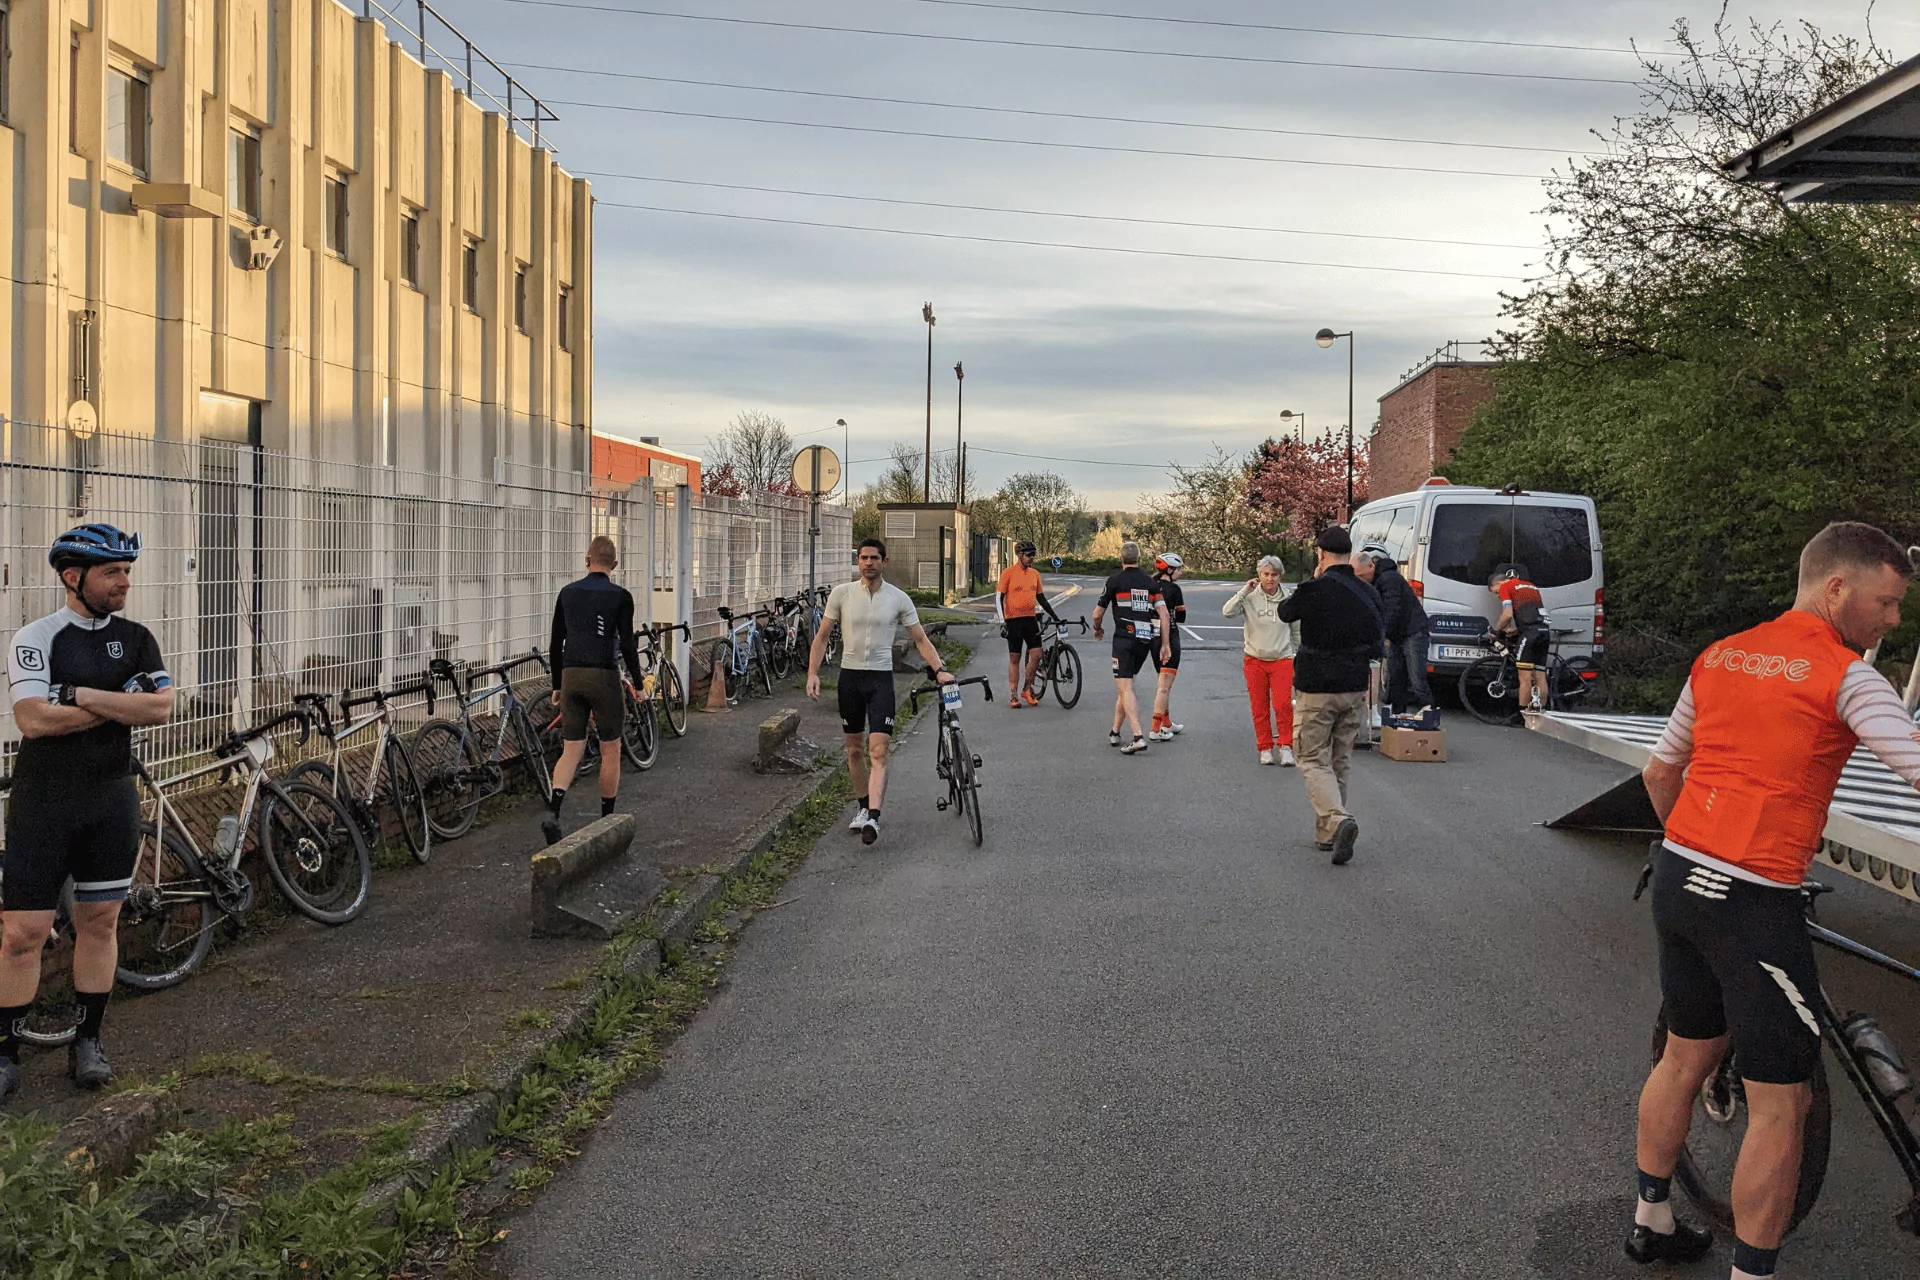 A dozen cyclists unloading bikes from a trailer and milling about